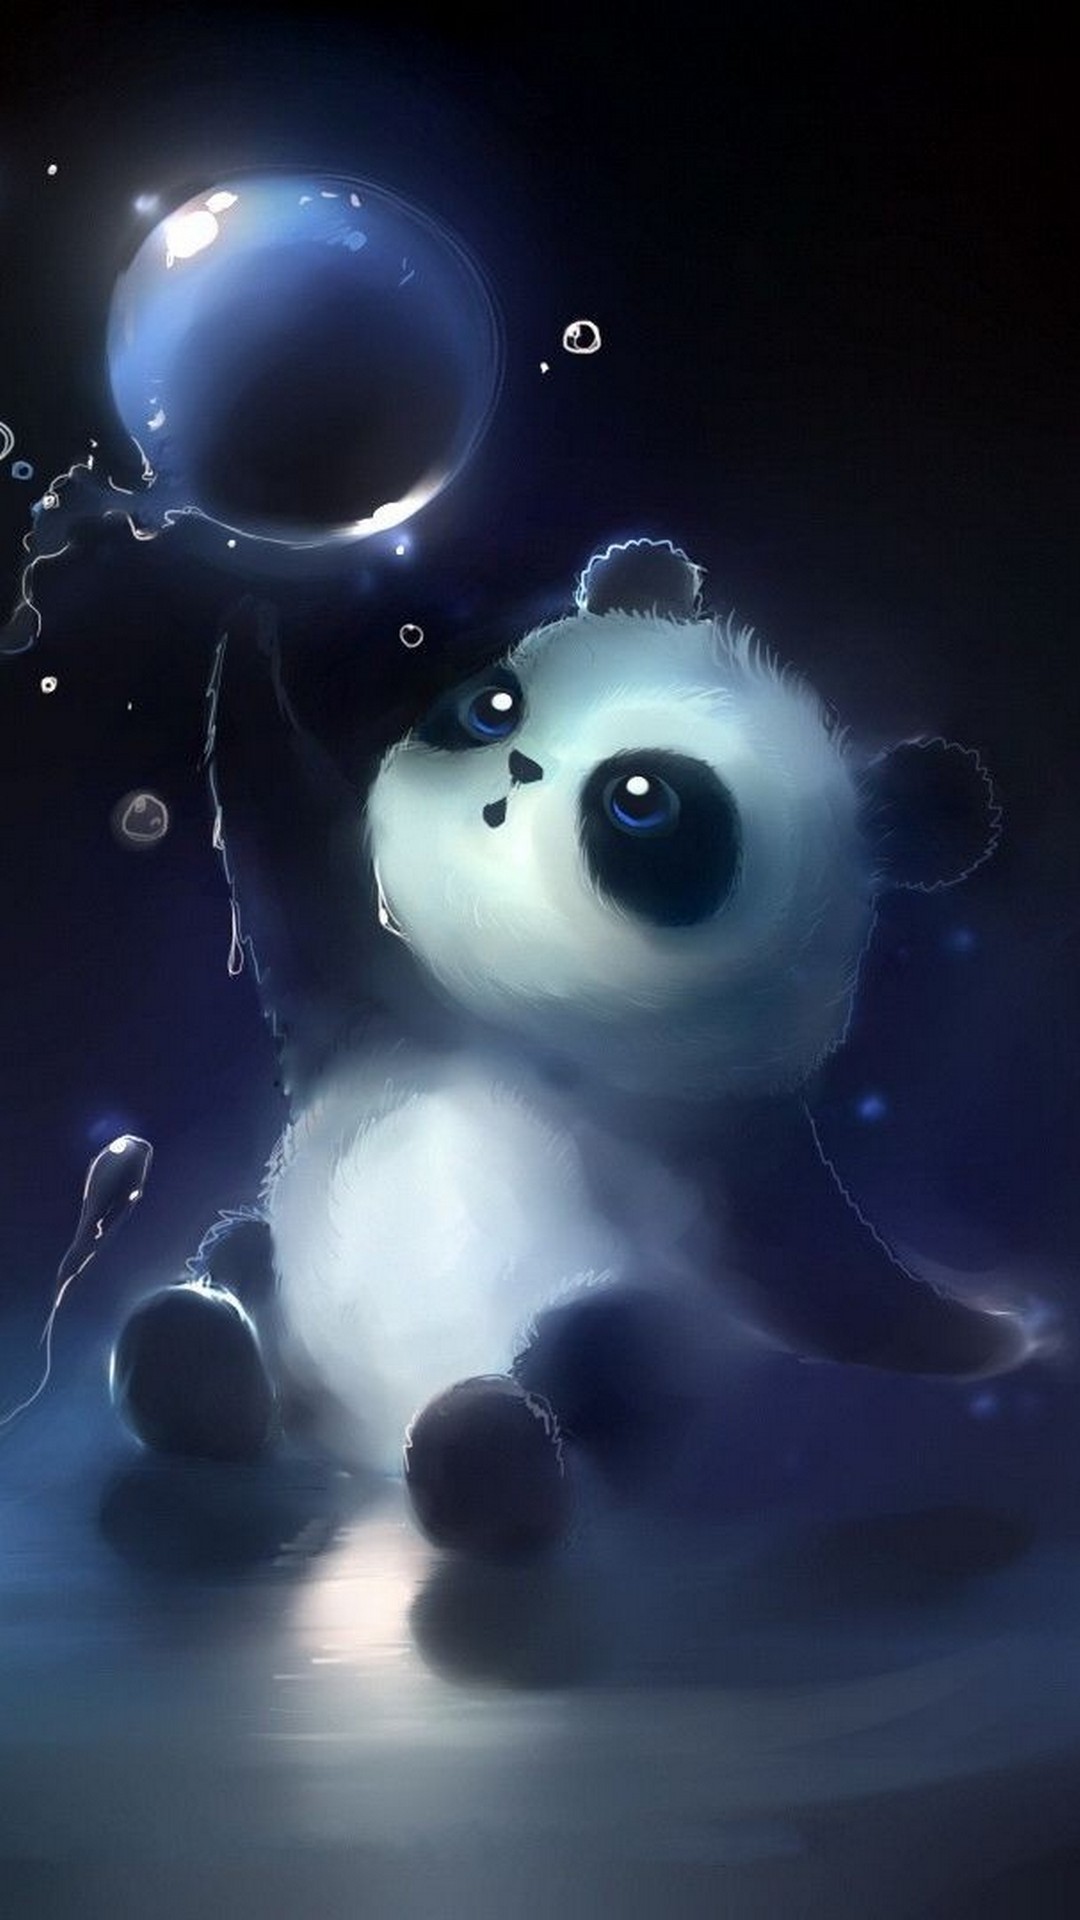 Android Wallpaper HD Baby Panda with HD resolution 1080x1920